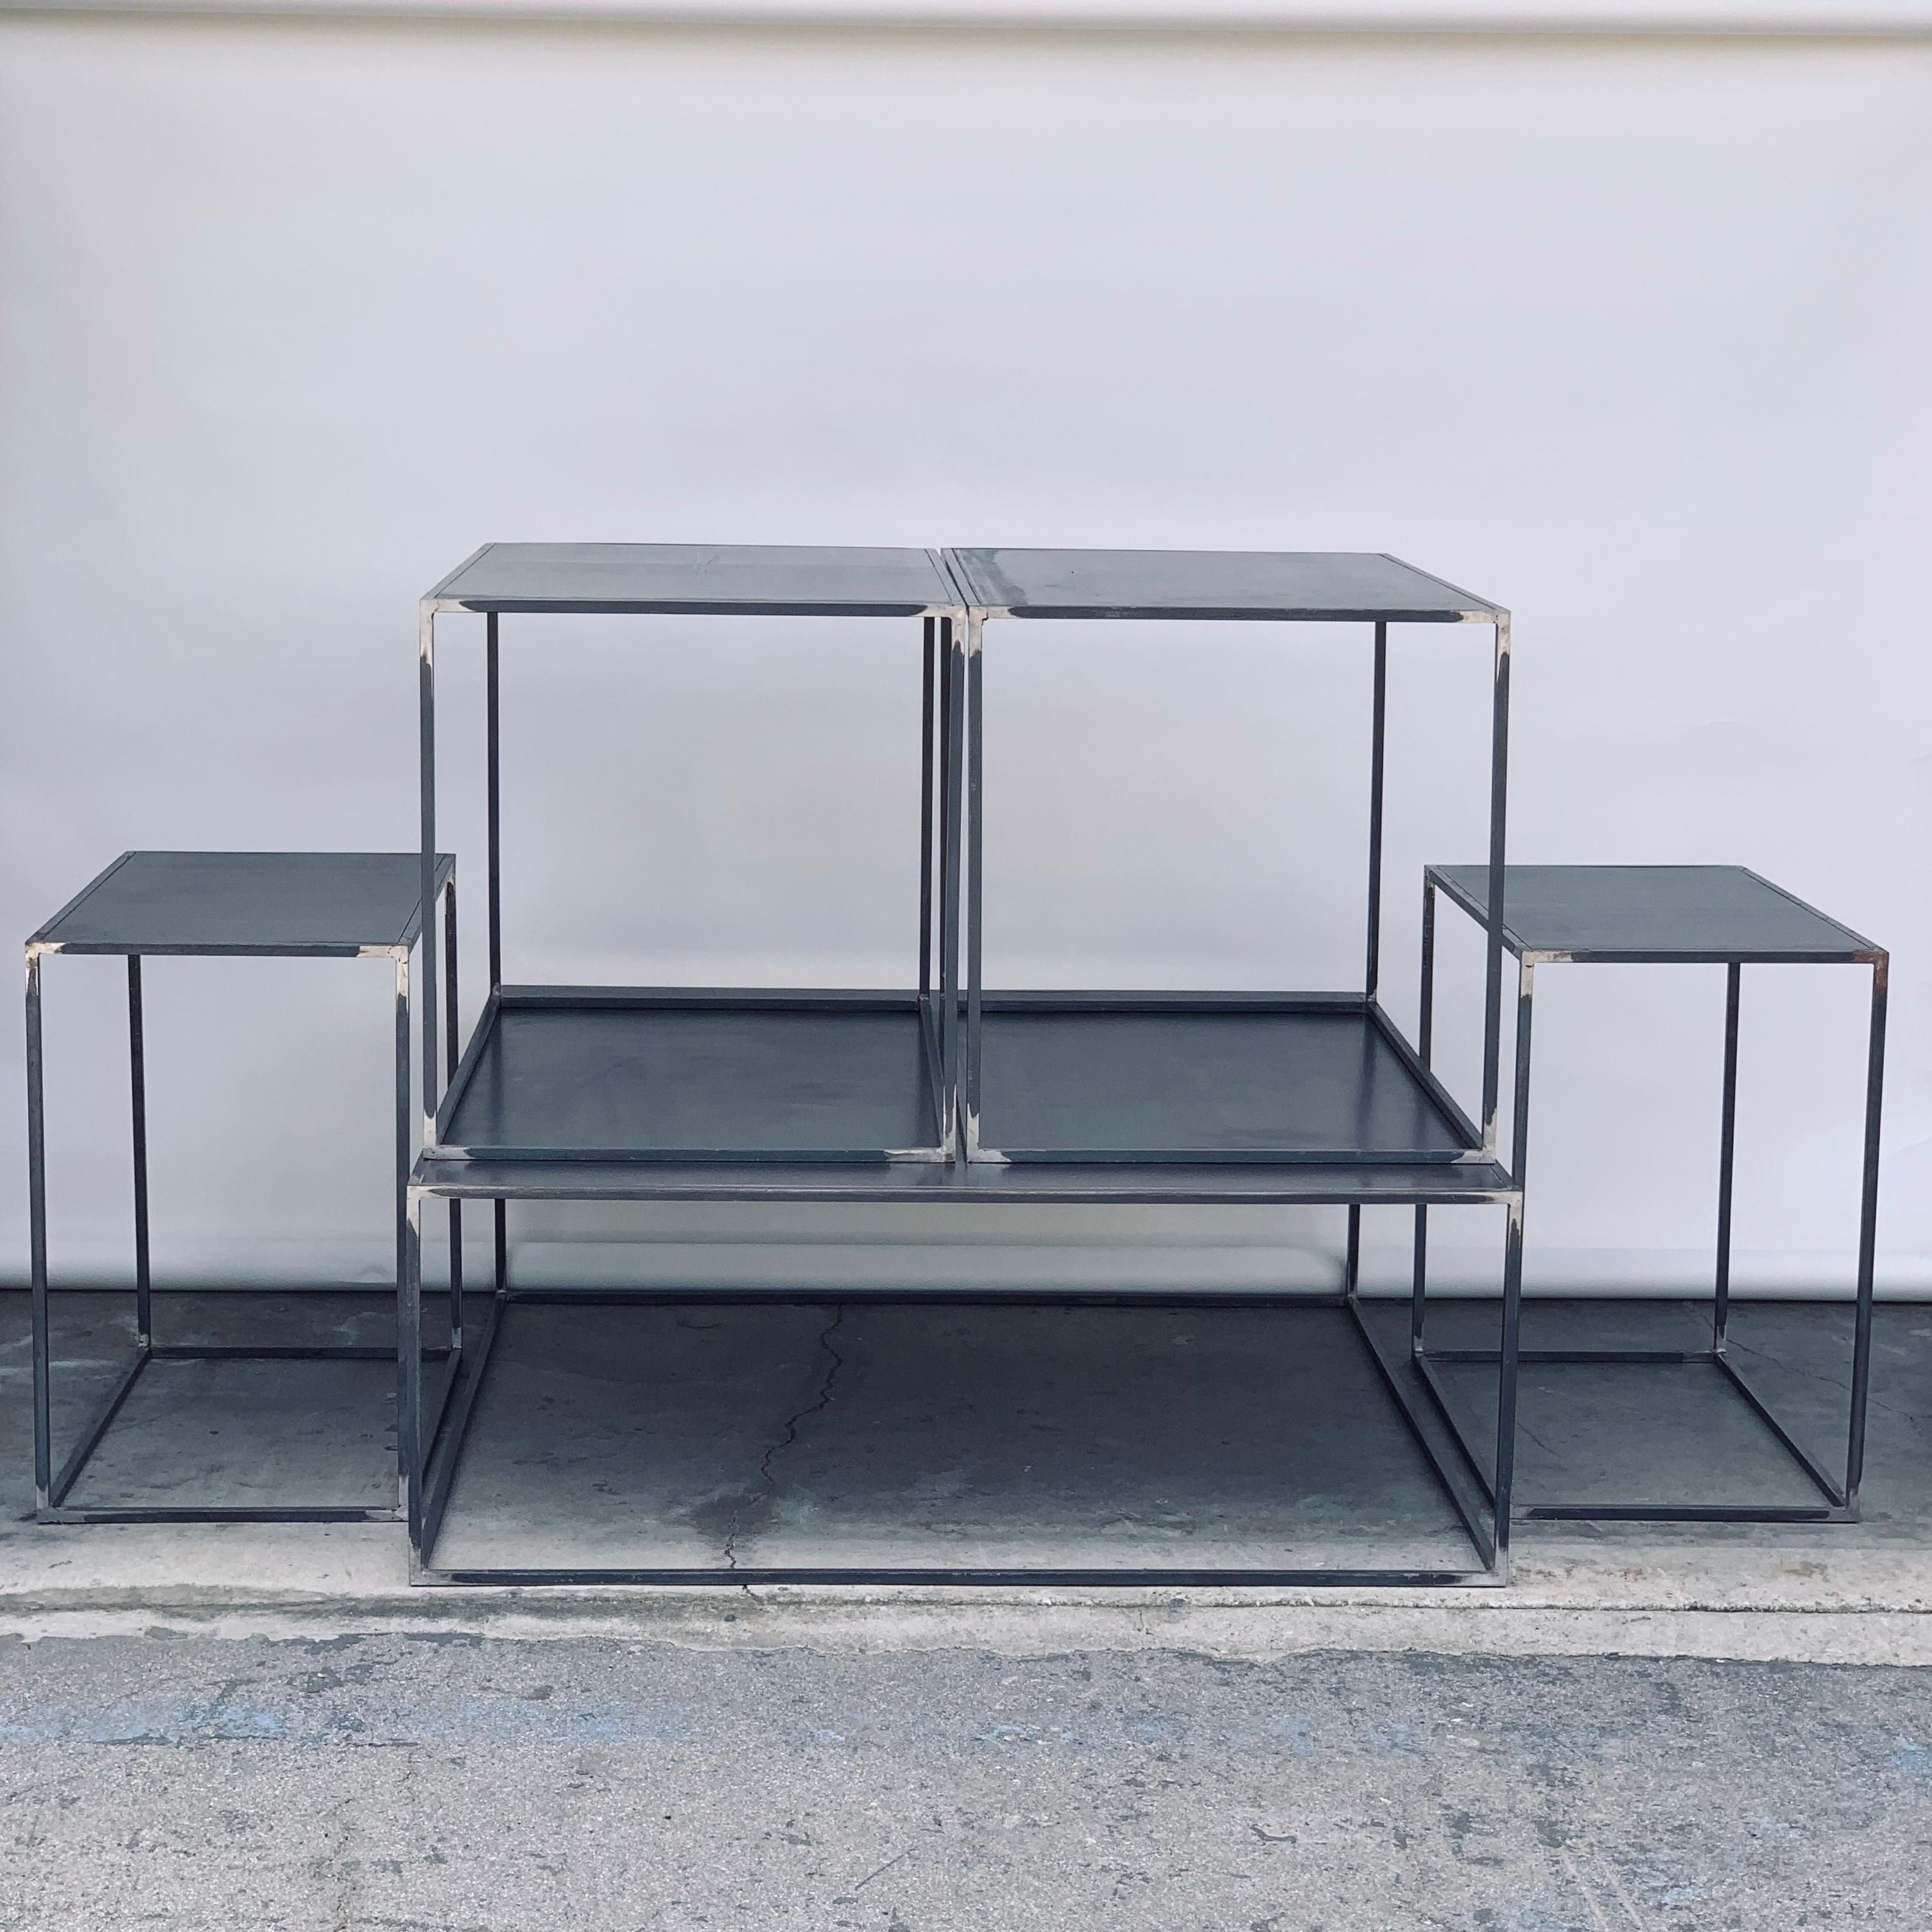 Complete set of 'Filiforme' coffee, side and occasional patinated steel plate tables by Design Frères.

Measures: Coffee table 43 in. x 43 in. x 16 in. tall
Side tables 33 in. x 21 in. x 22 in. tall
Occasional tables 25 in. x 15 in. x 24 in. tall.